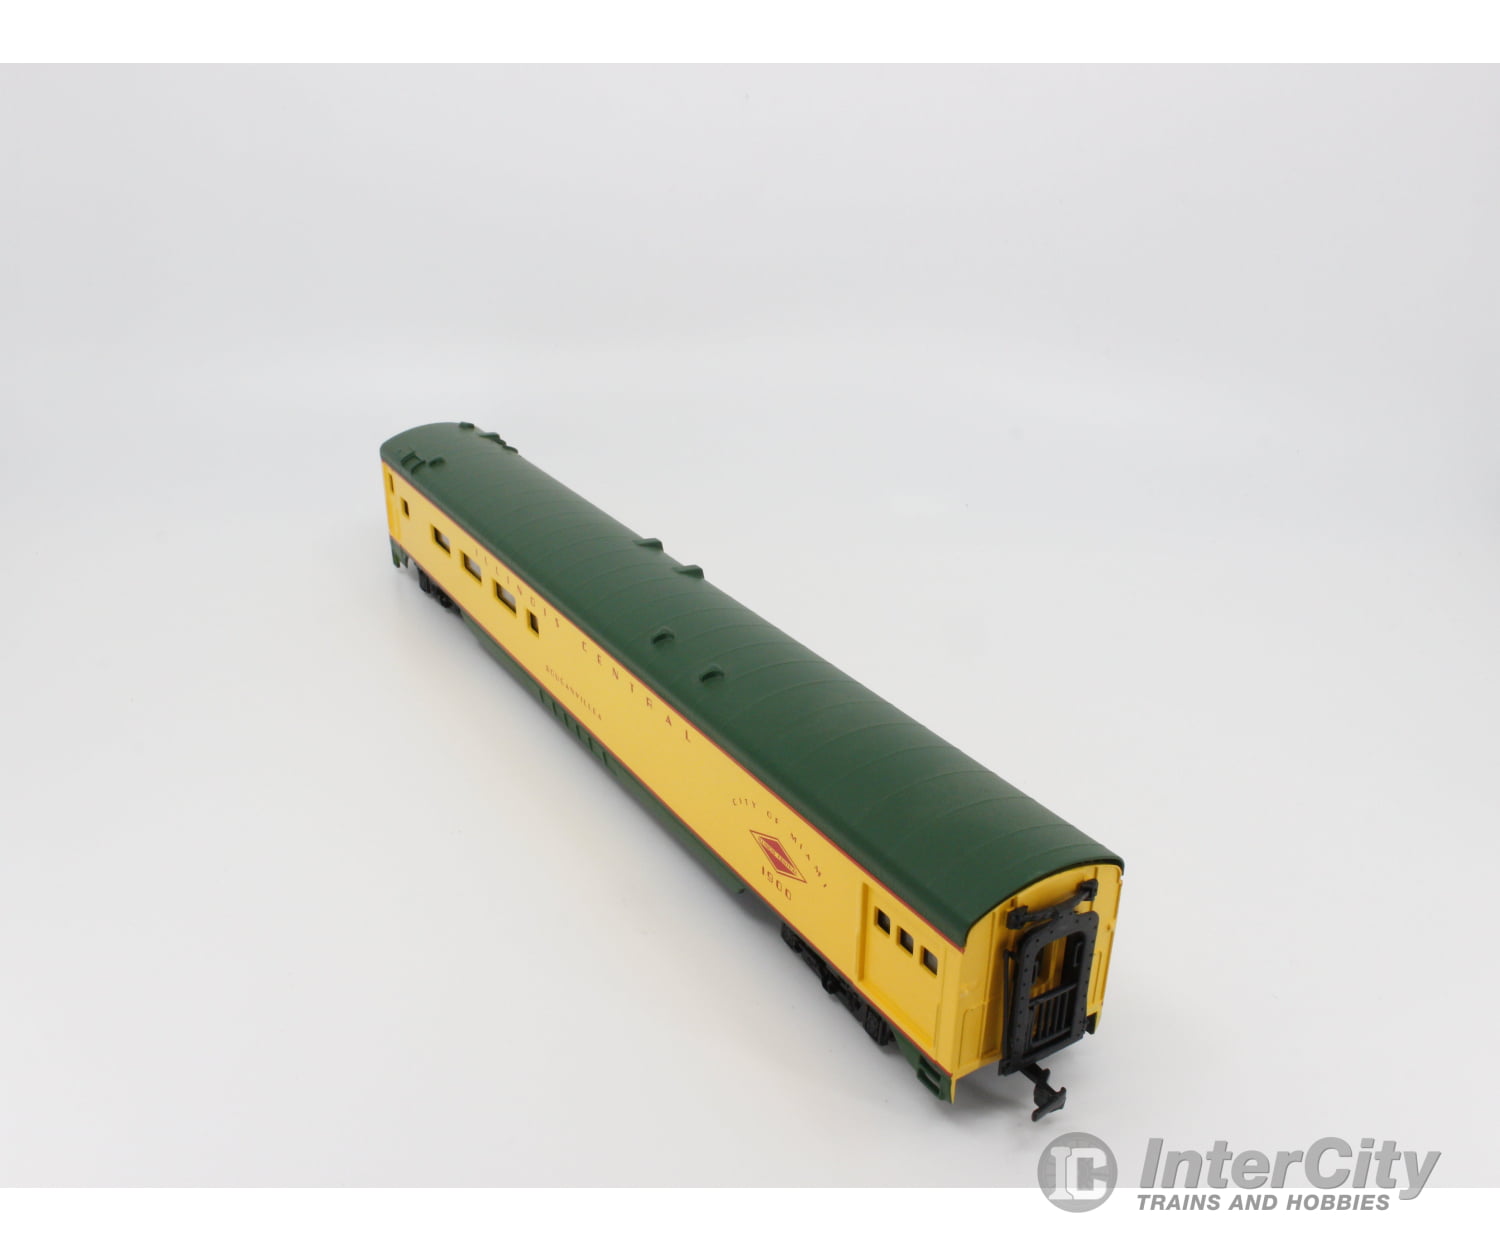 International Hobby Corp. 48334 Ho Combine Passenger Car Smooth Side P.s. Illinois Central (Ic)